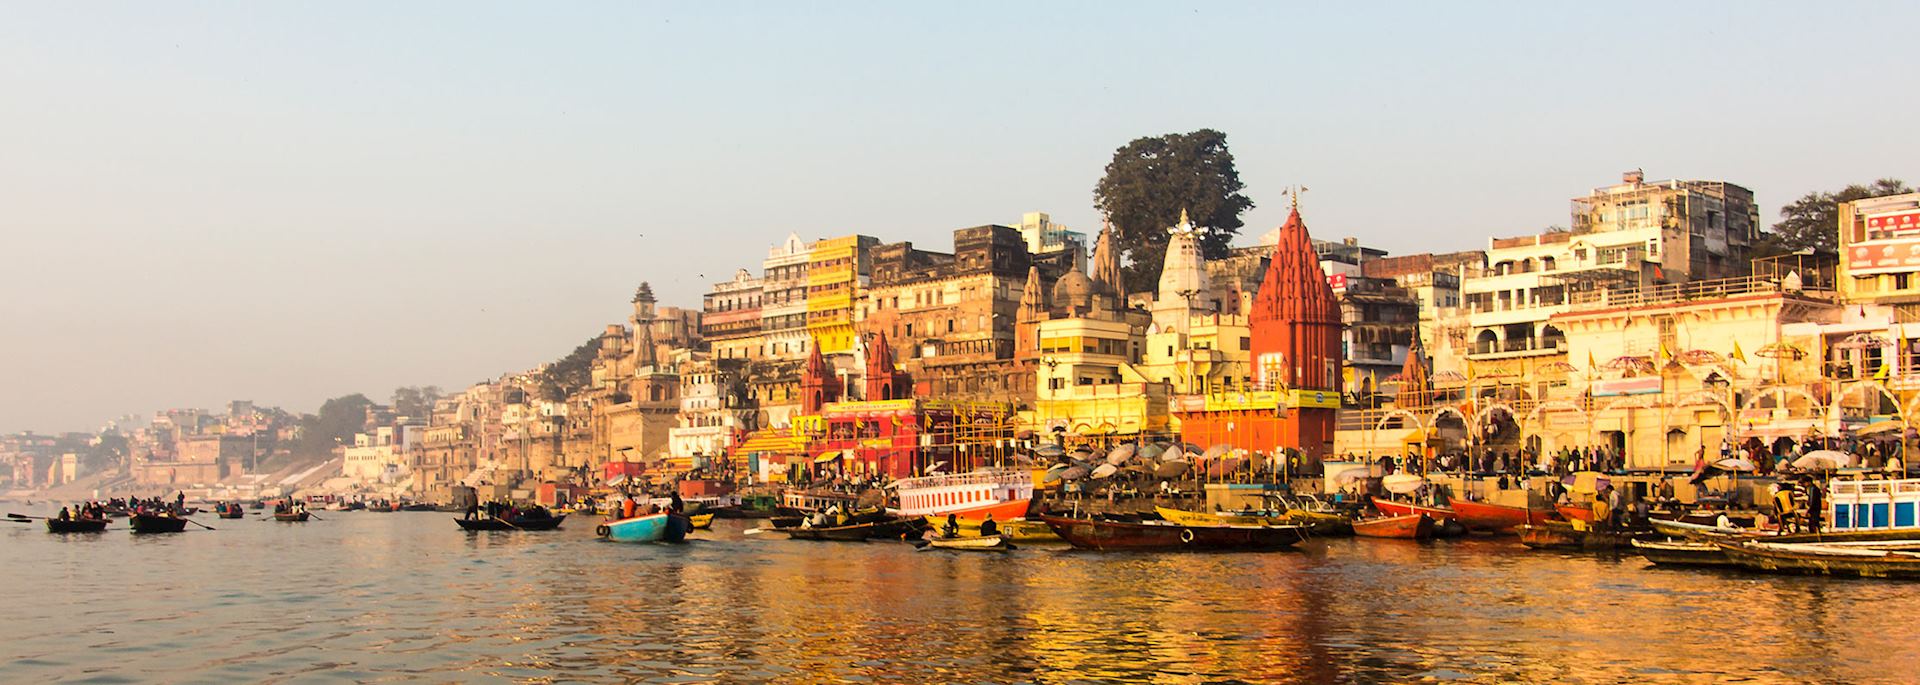 Life on the Ganges in Varanasi